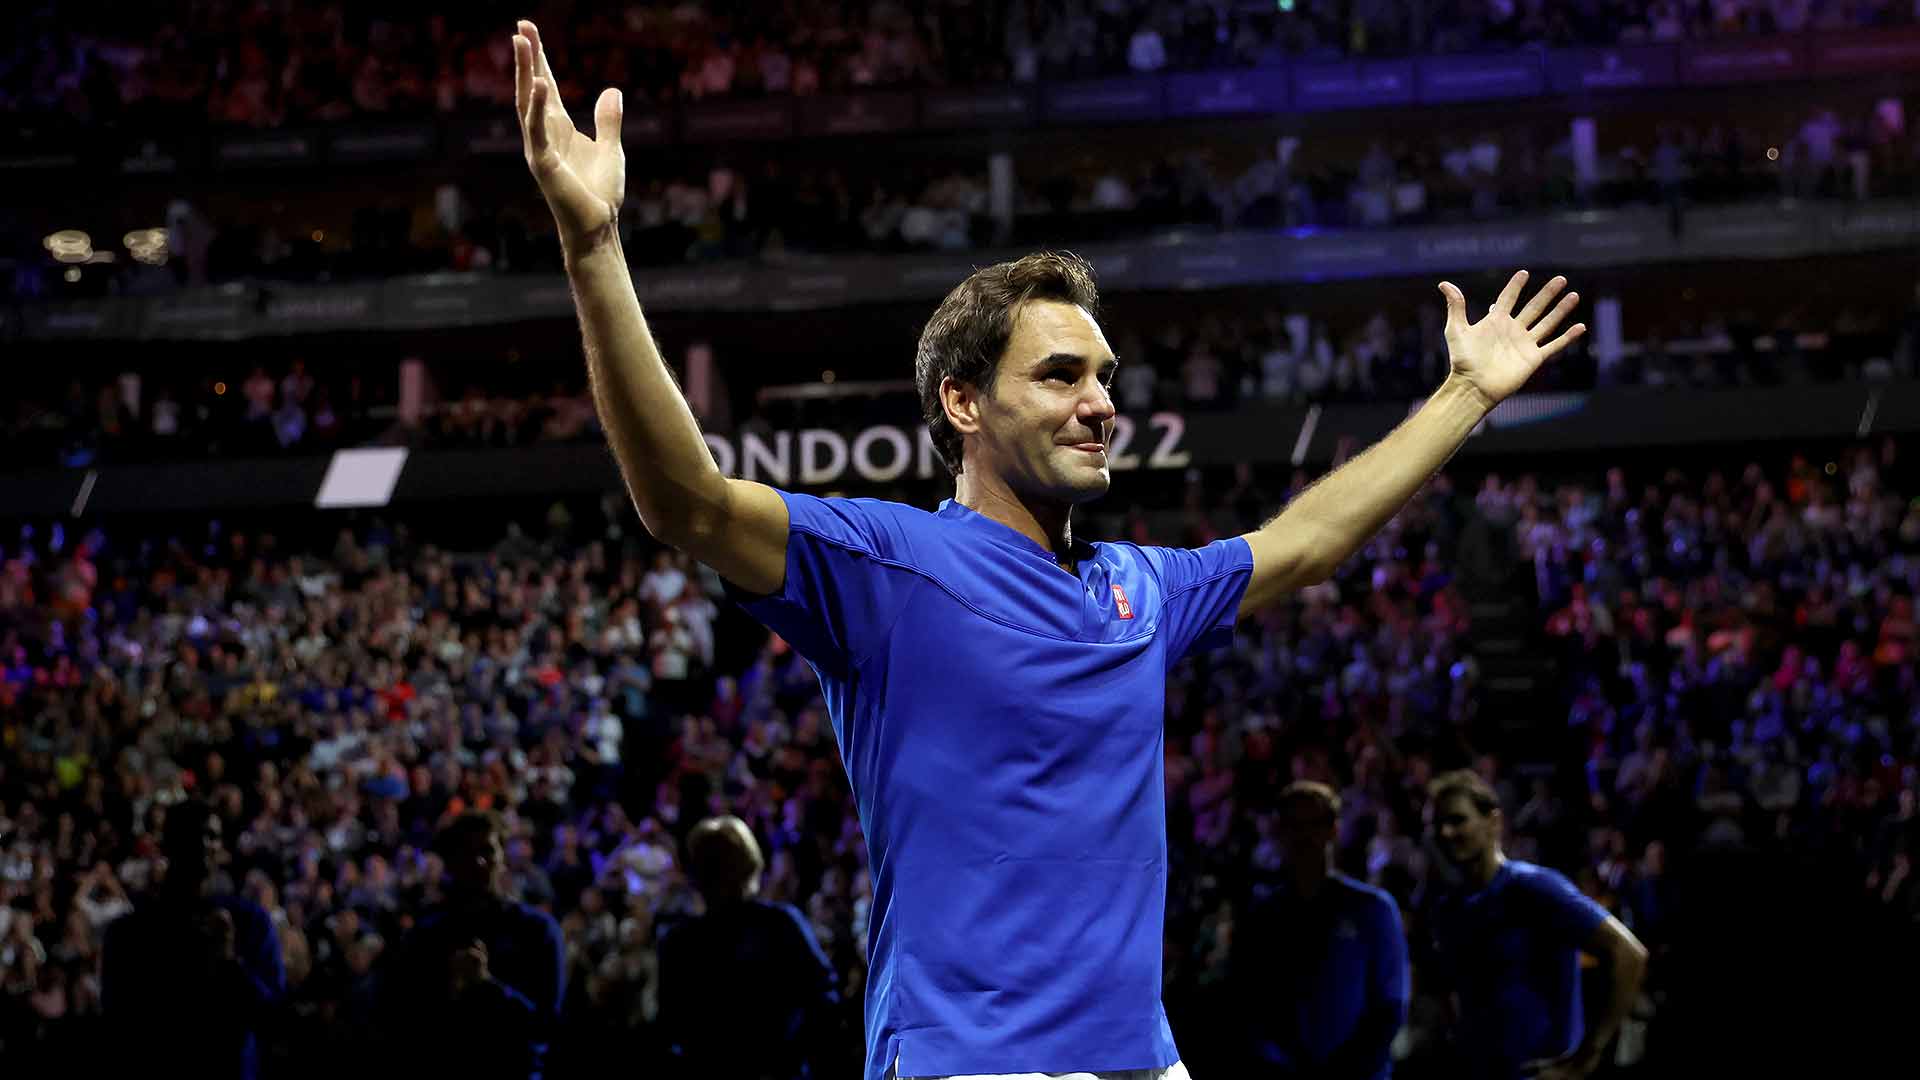 Roger Federer says his final farewell to fans at The O2.